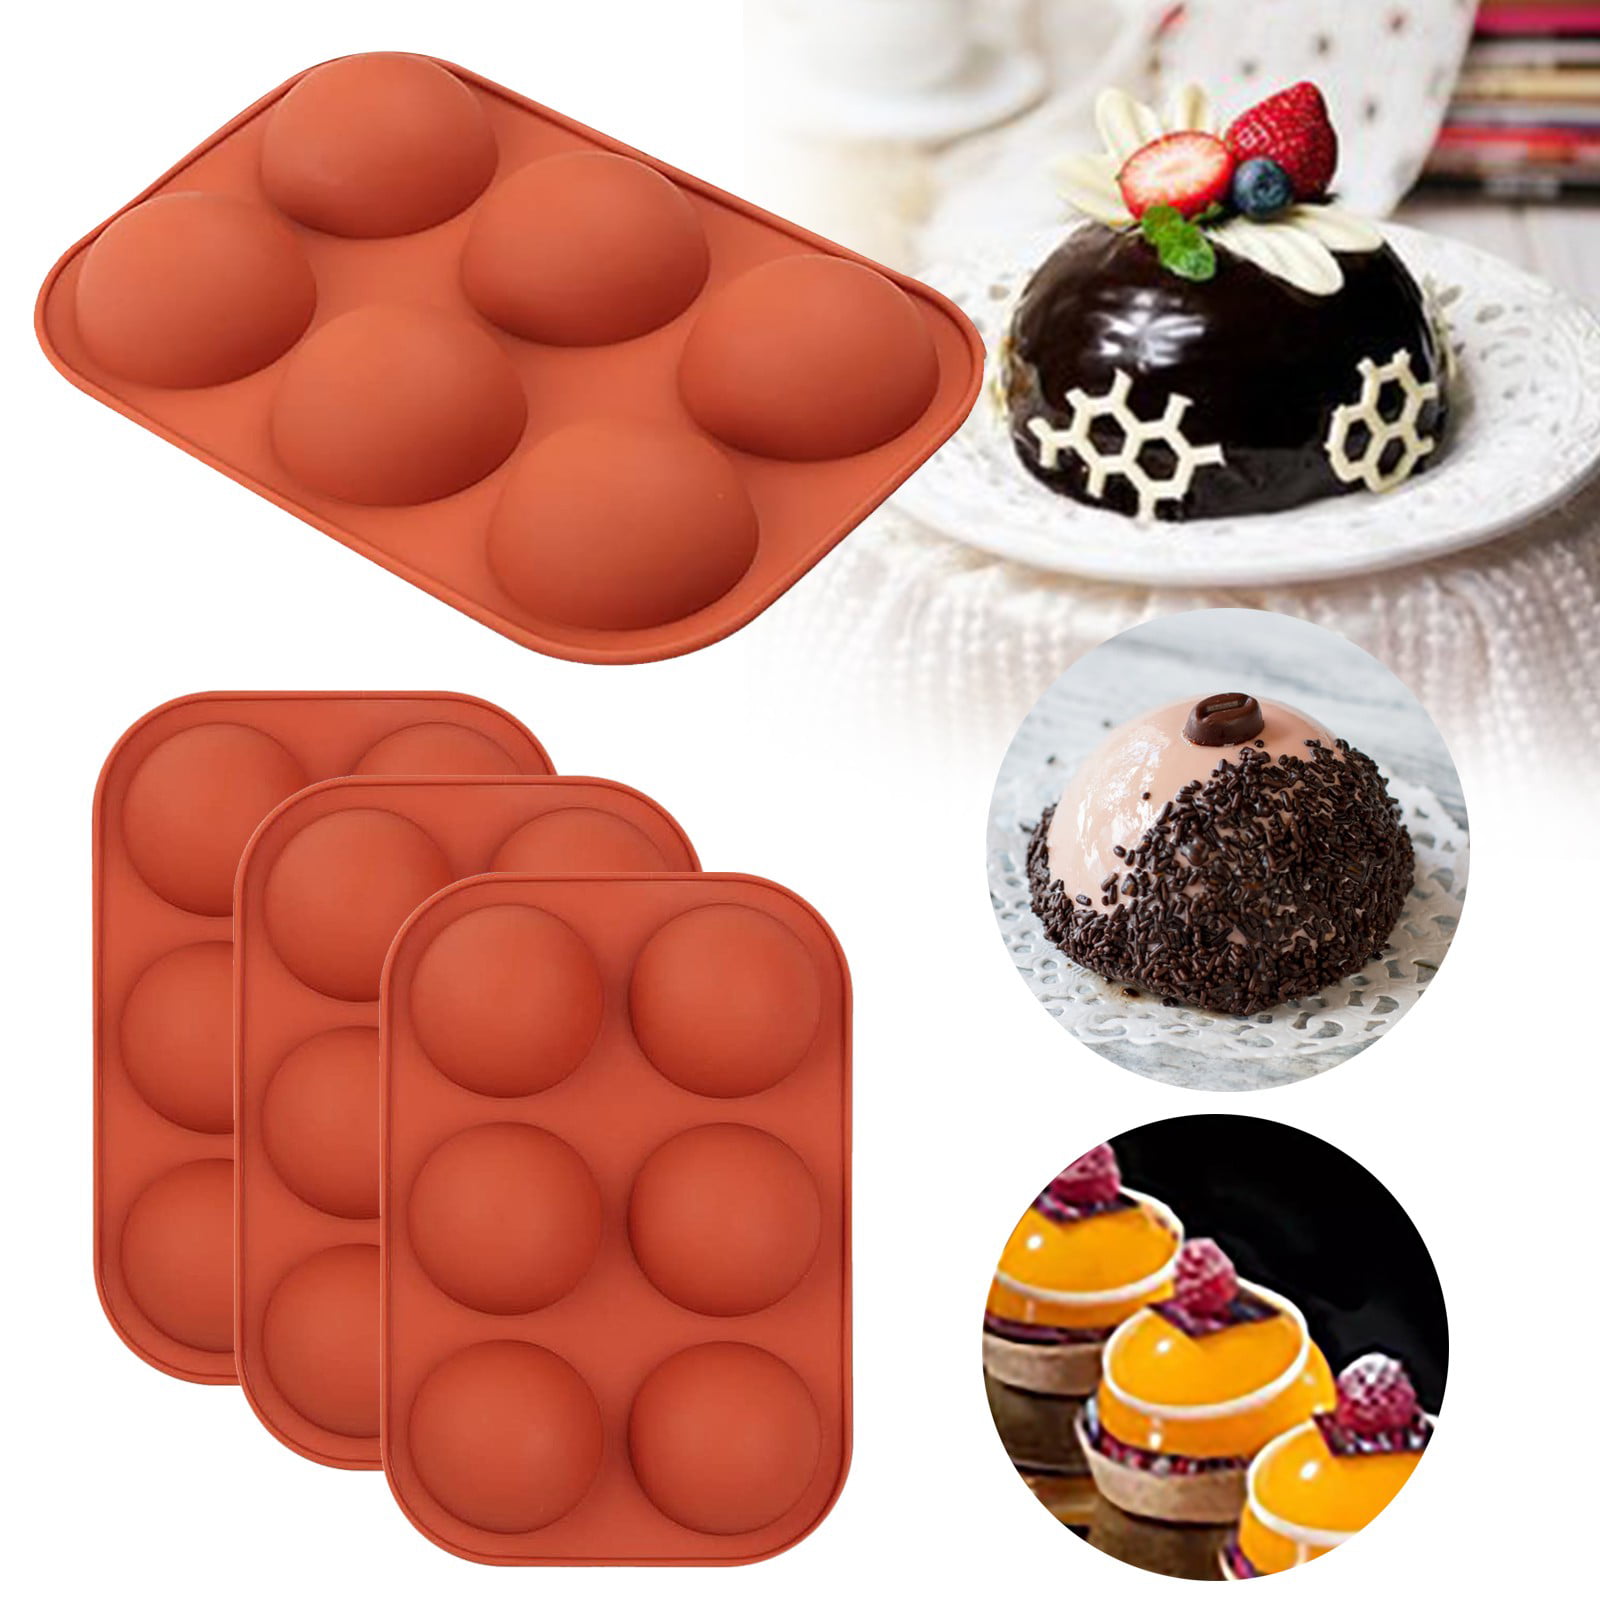 5cm Dia Half Ball Sphere Chocolate Cake Muffin Pastry JellY Silicone Mold T N1Y1